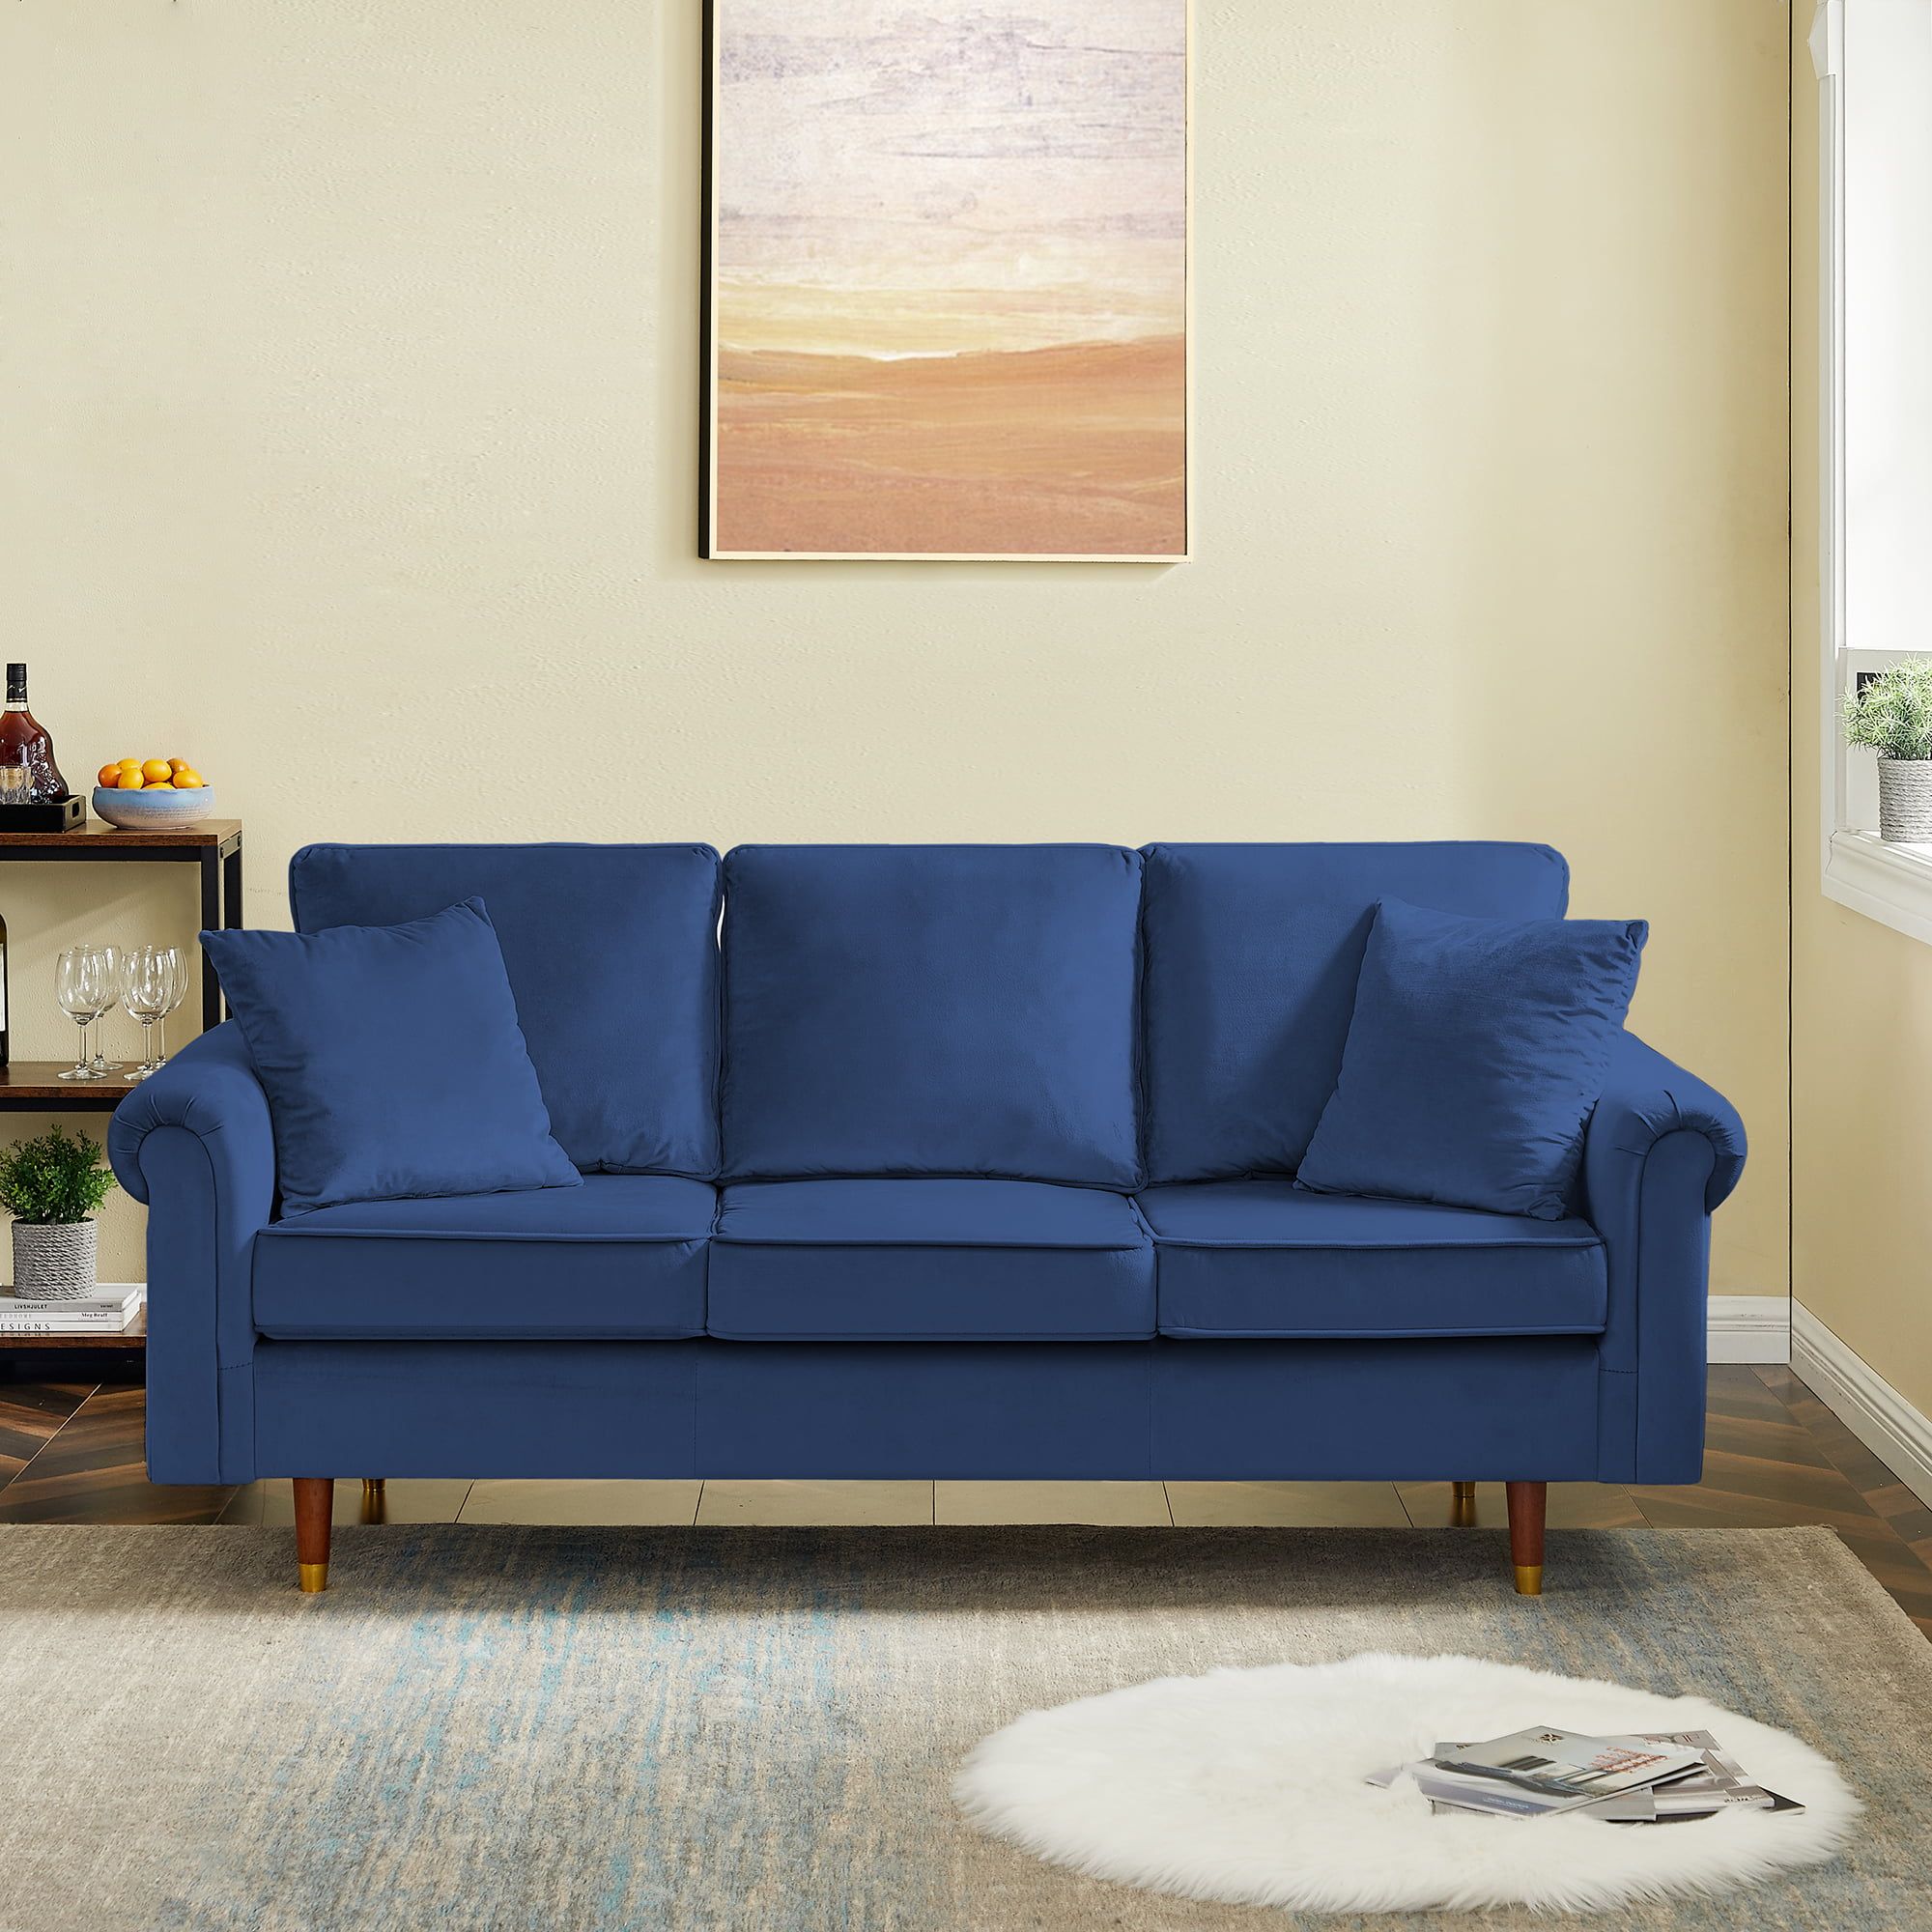 Blue Sofa Couch 3 Seater, Velvet Fabric Sofa With Thick Cushion And Deep  Seat Modern Upholstered Accent Arm Sofa Loveseat For Living Room, Bedroom,  Office, Apartment, Small Space – Walmart With Regard To Office Modern Fabric Sofas (View 11 of 15)